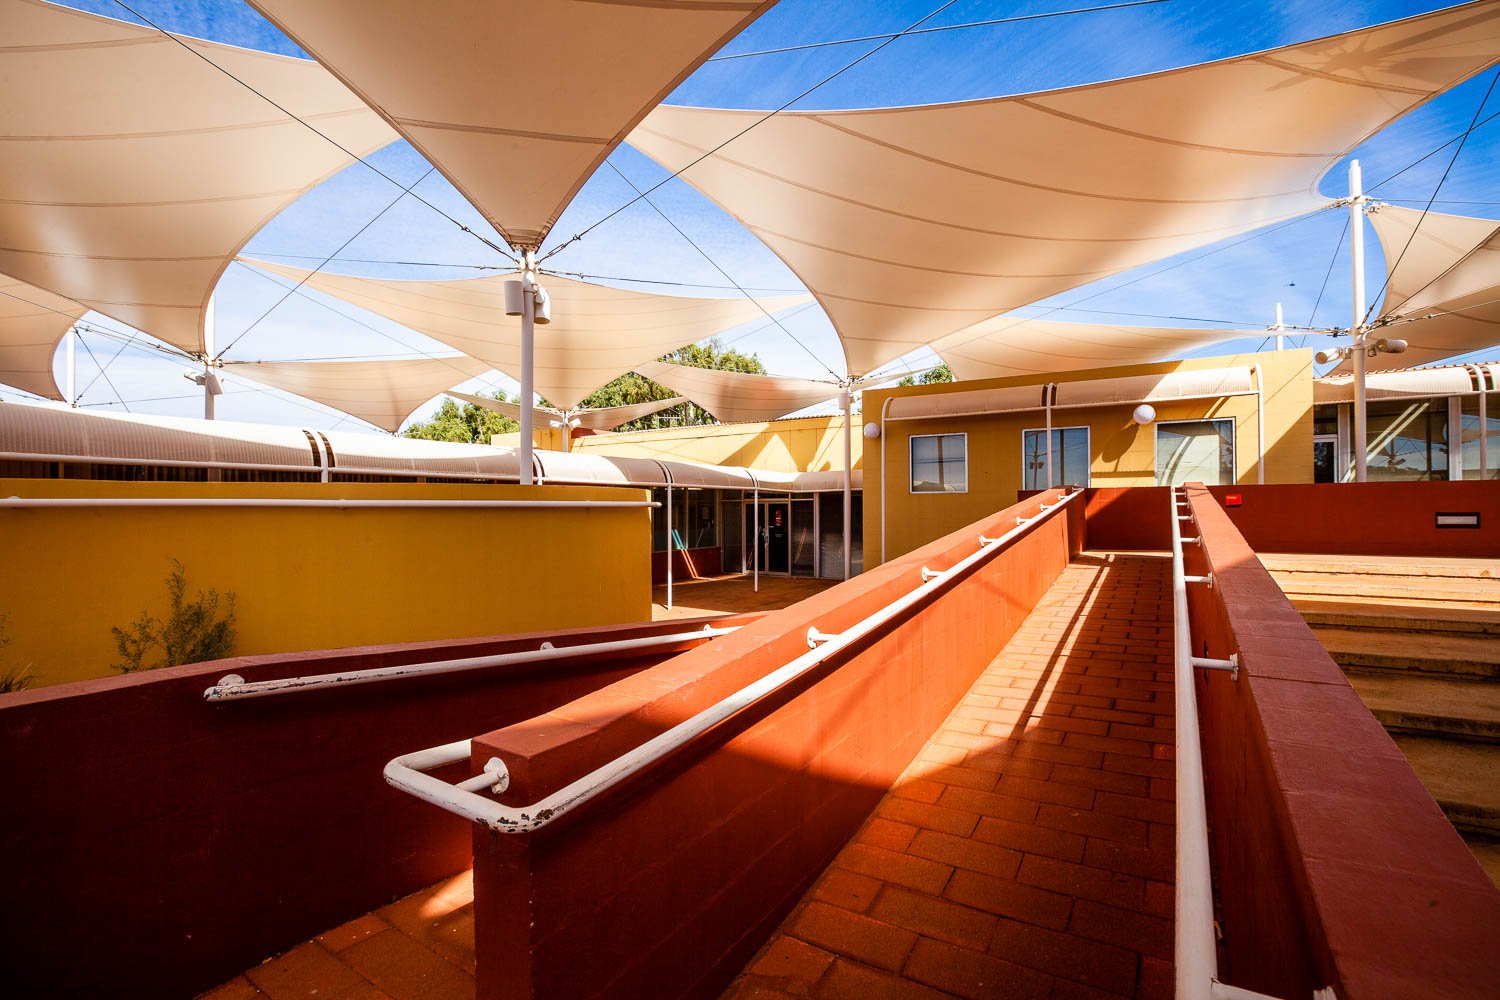 Beautiful inside architecture of a big lobby, Yulara Resort #3 - Red Centre NT